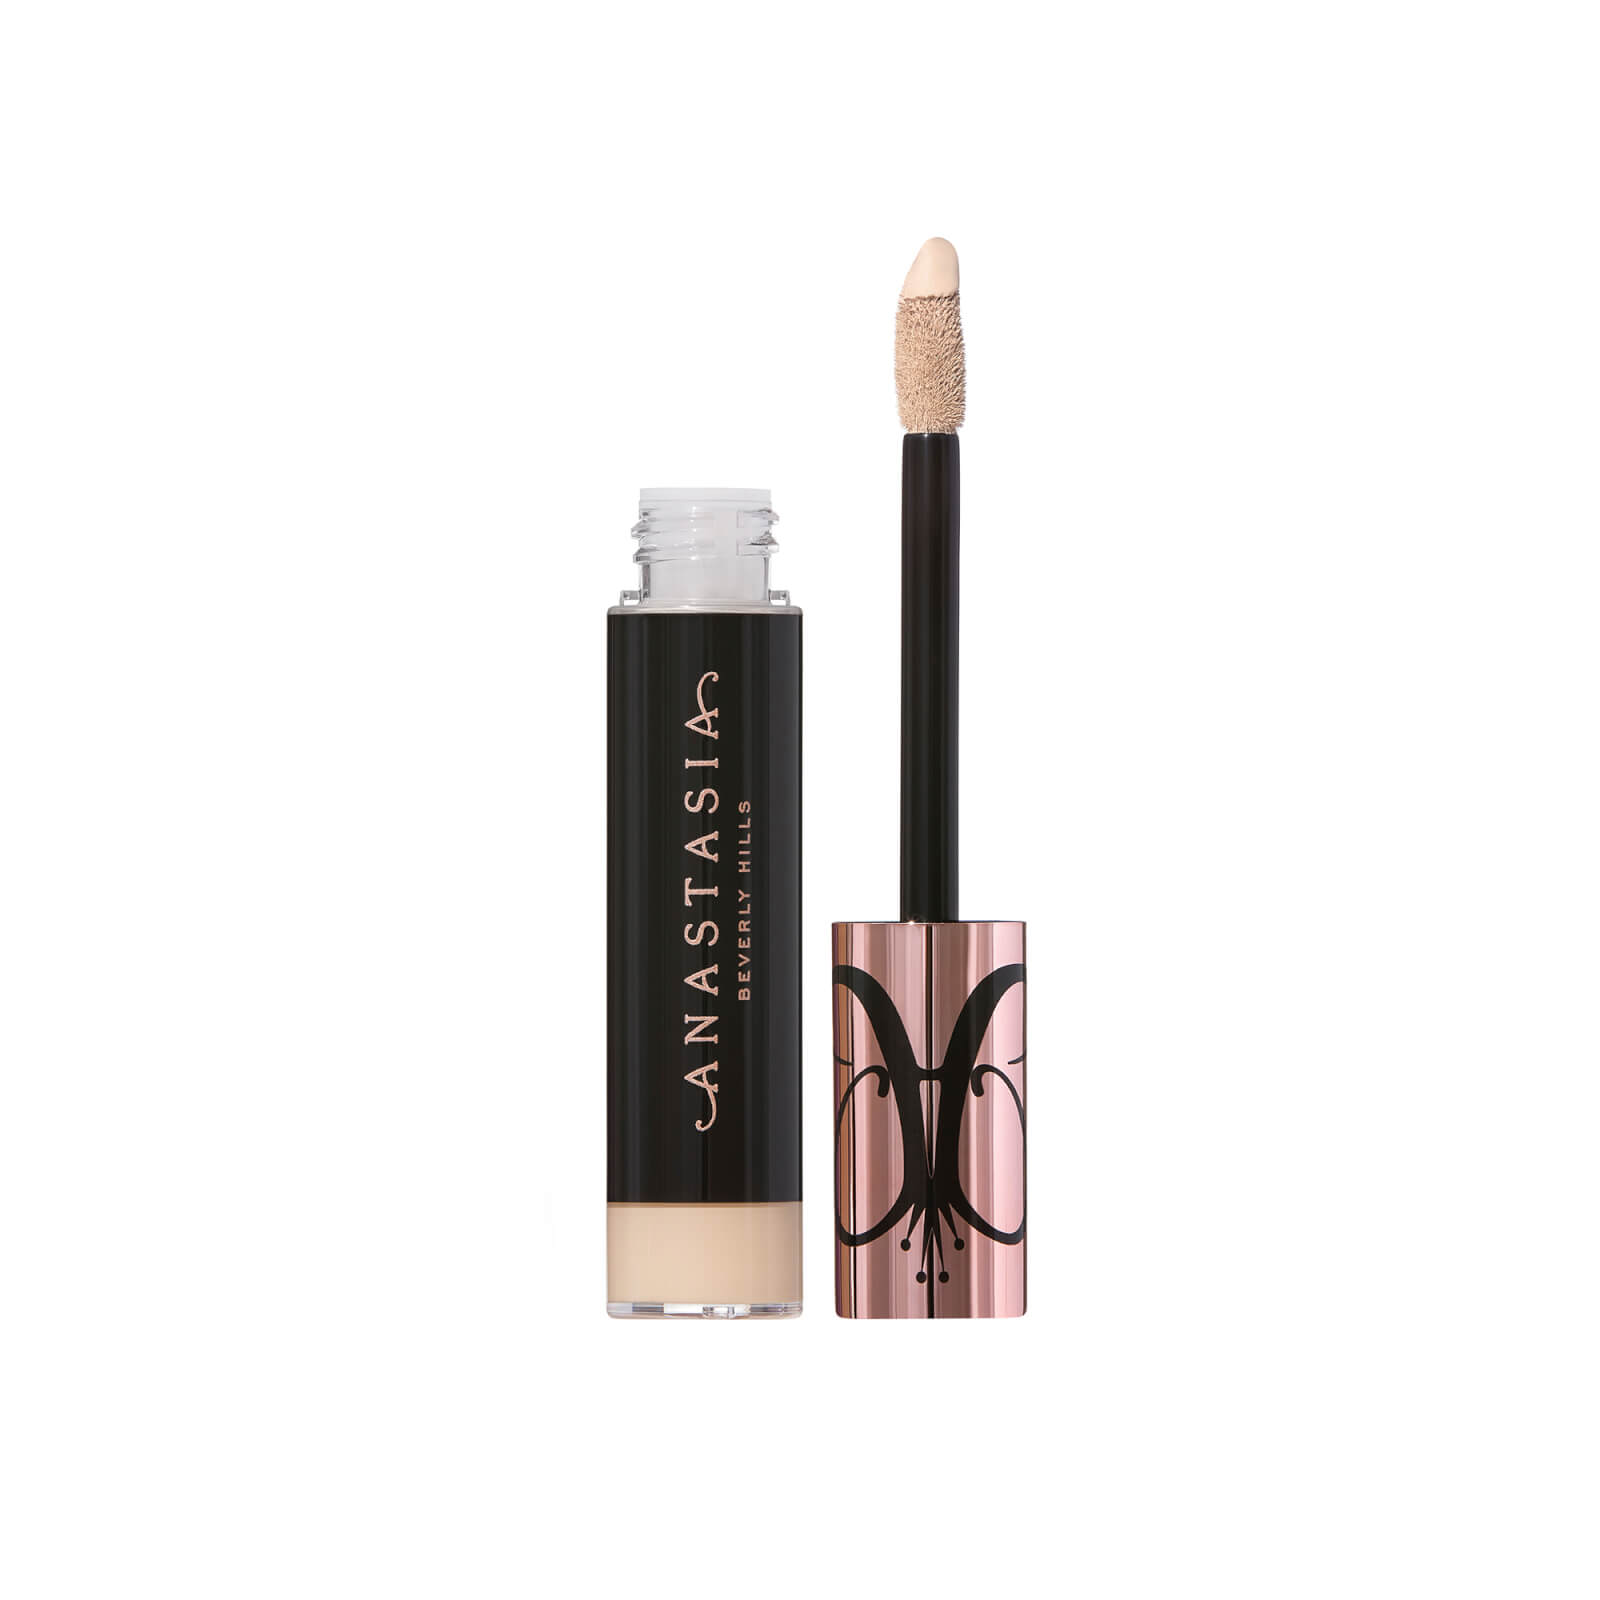 Anastasia Beverly Hills Magic Touch Concealer 12ml (Various Shades) - 5